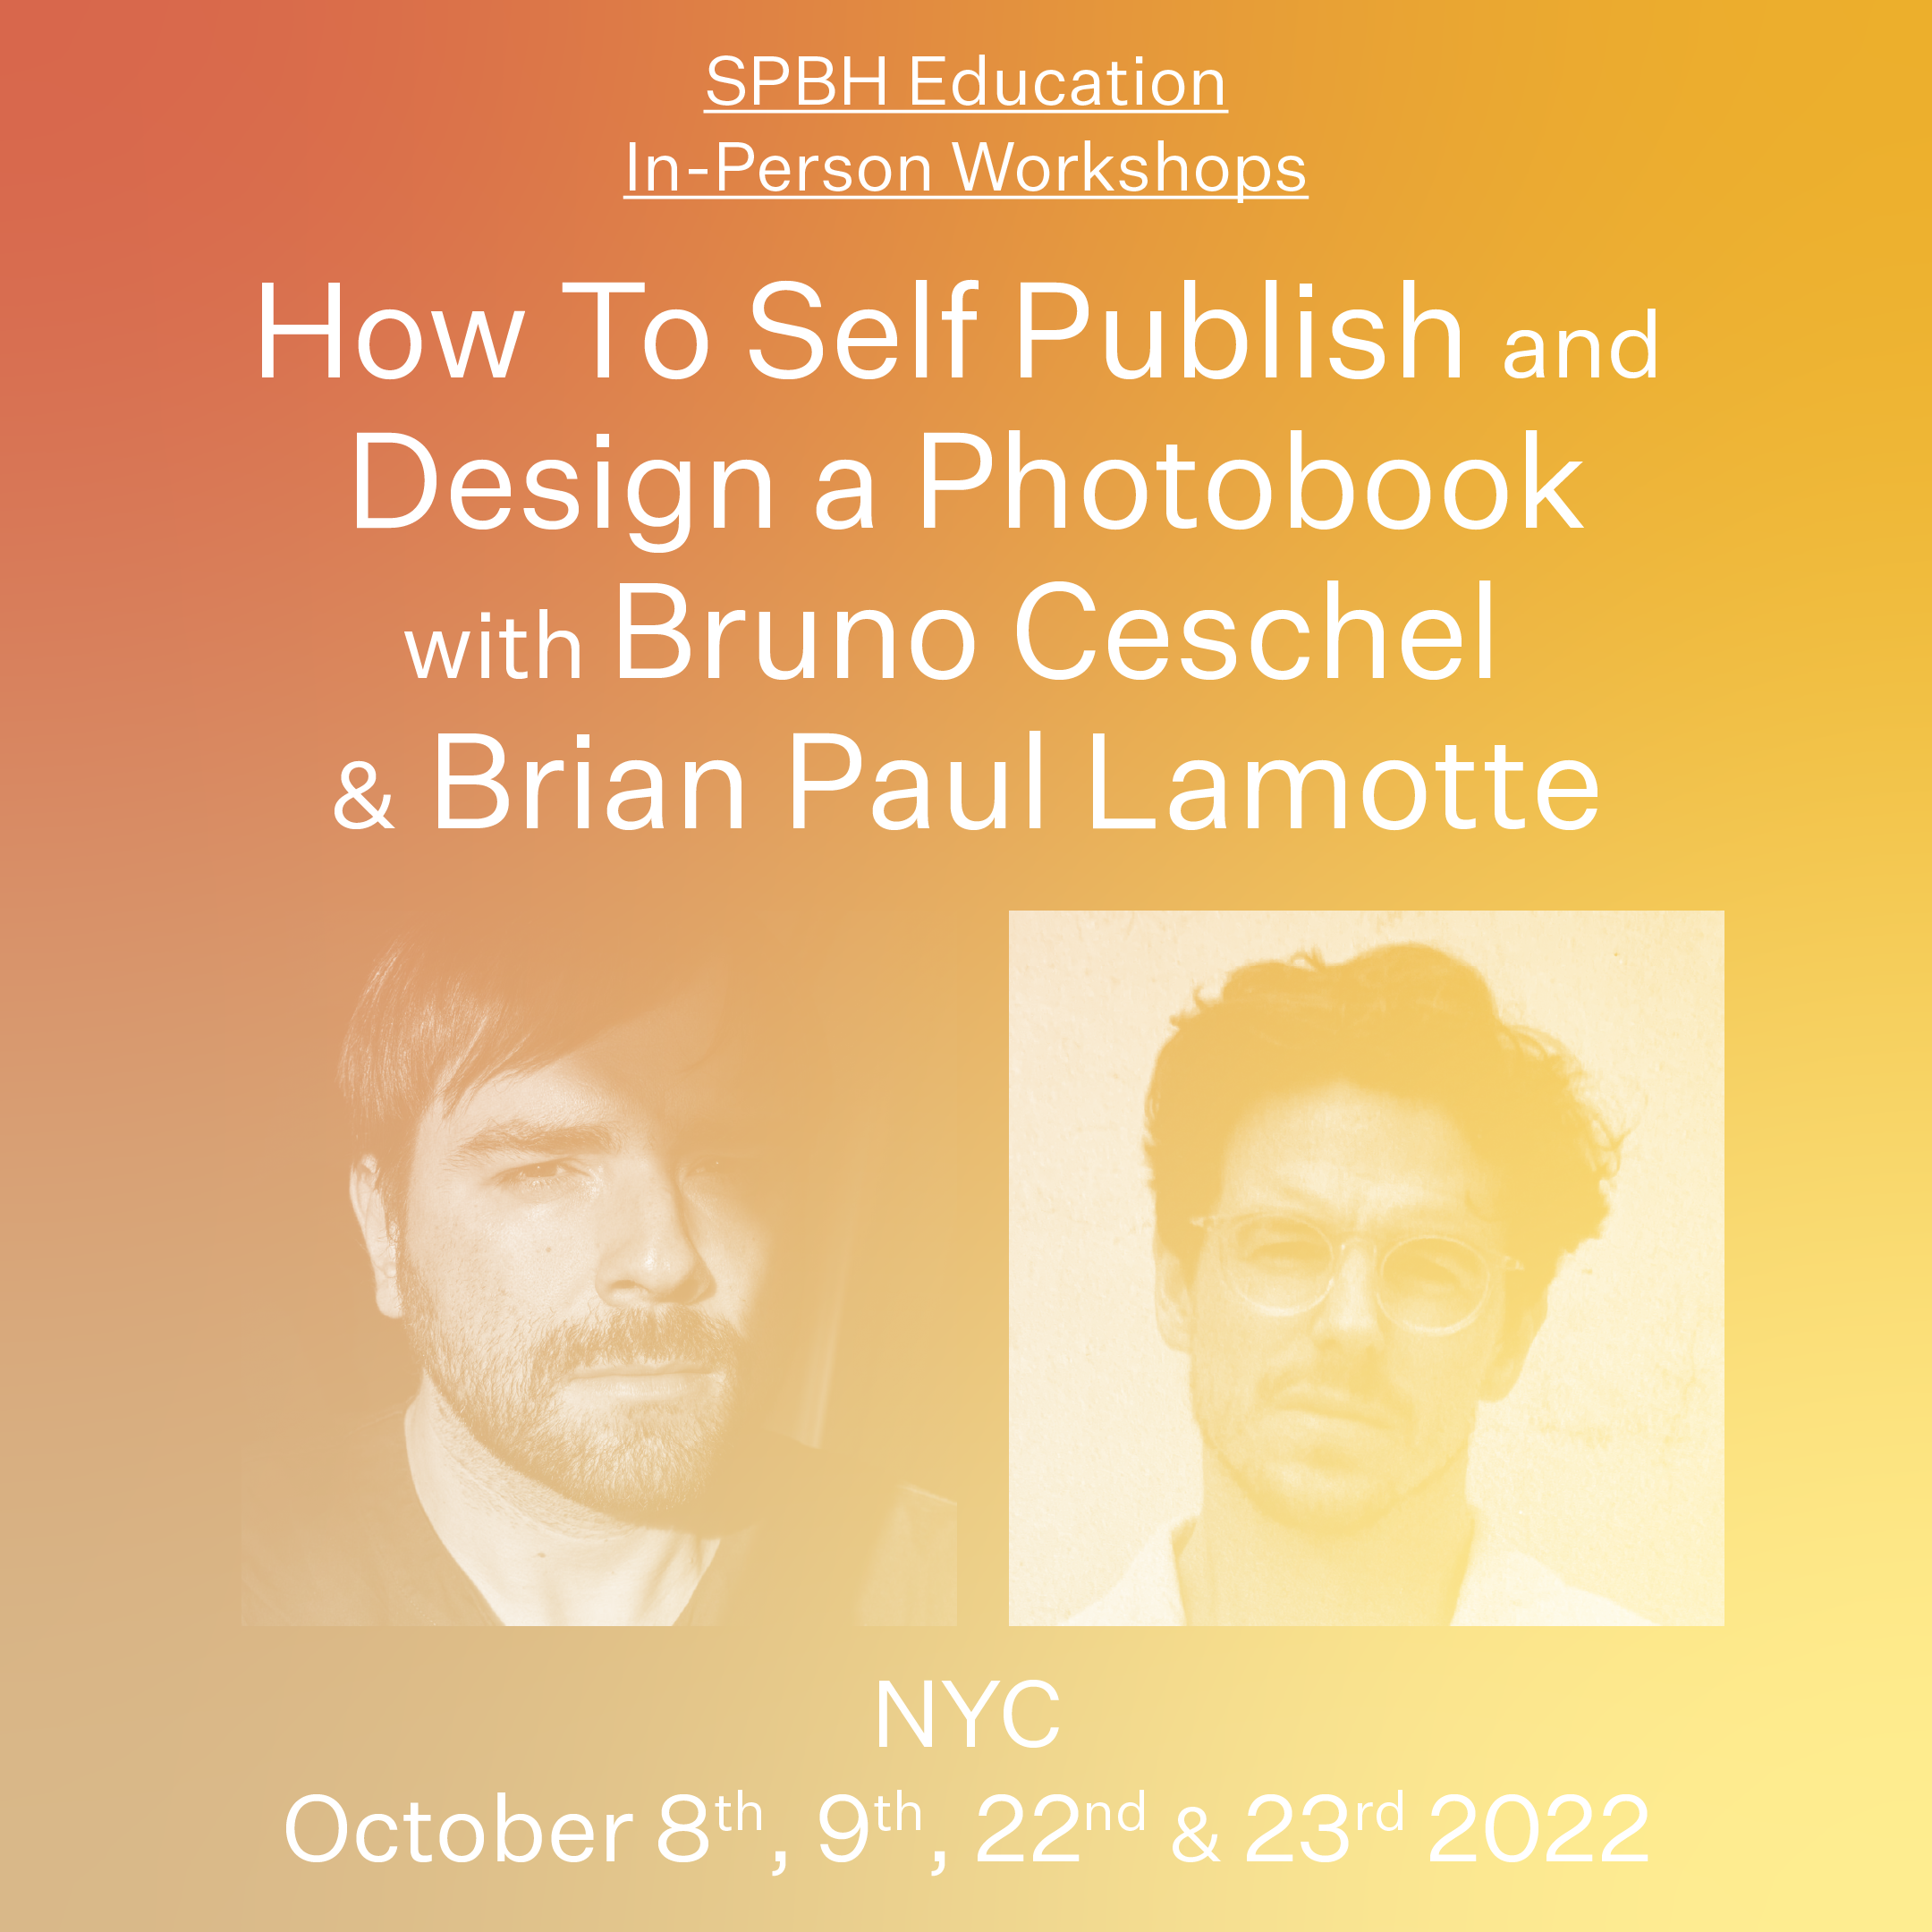 NYC WORKSHOP: How To Self Publish and Design a Photobook with Bruno Ceschel and Brian Paul Lamotte